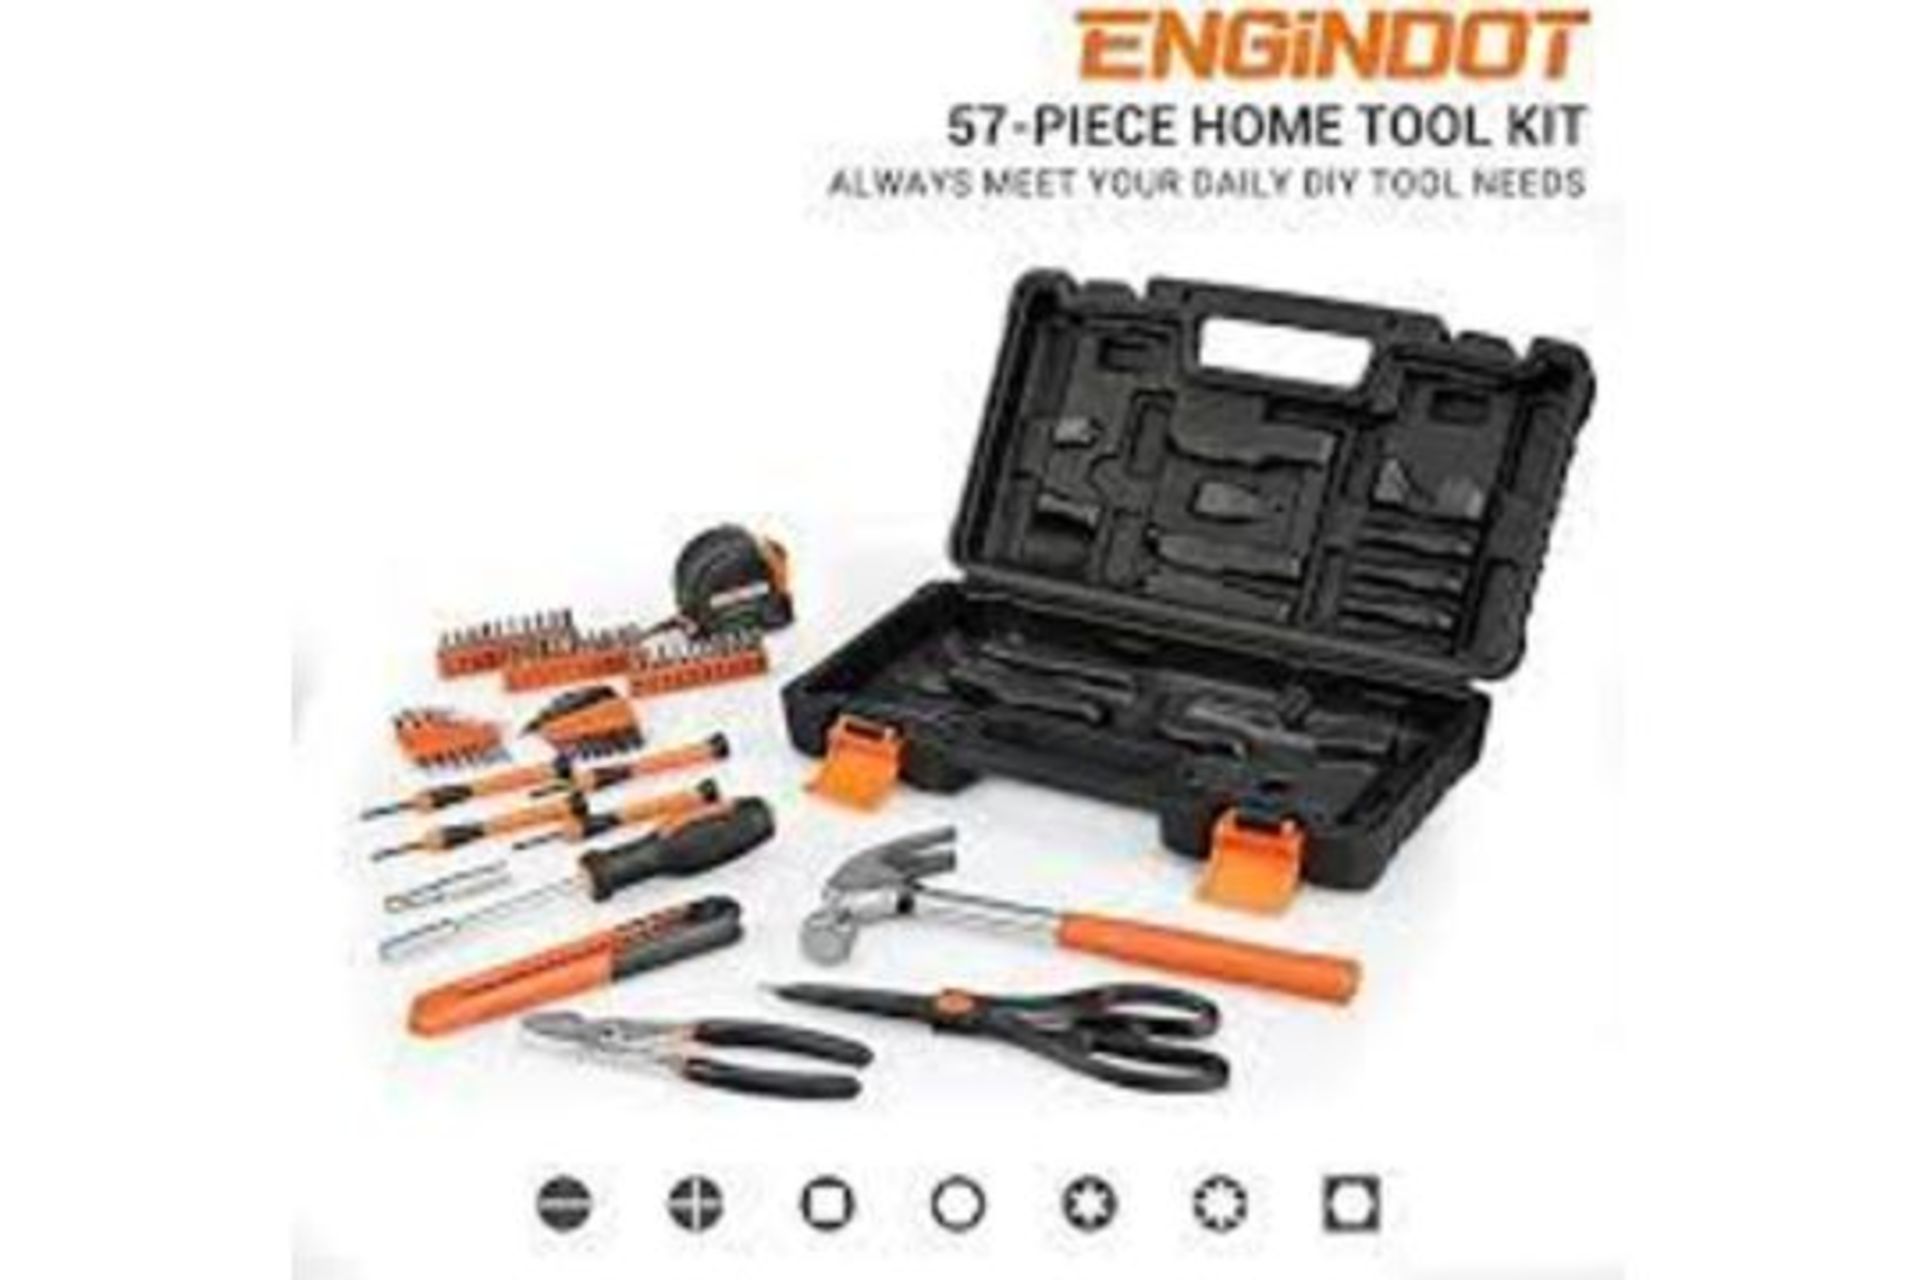 40 X NEW BOXED ENGiNDOT Home Tool Kit, 57-Piece Basic Tool kit with Storage Case. (ROW 10) HANDY FOR - Image 2 of 2